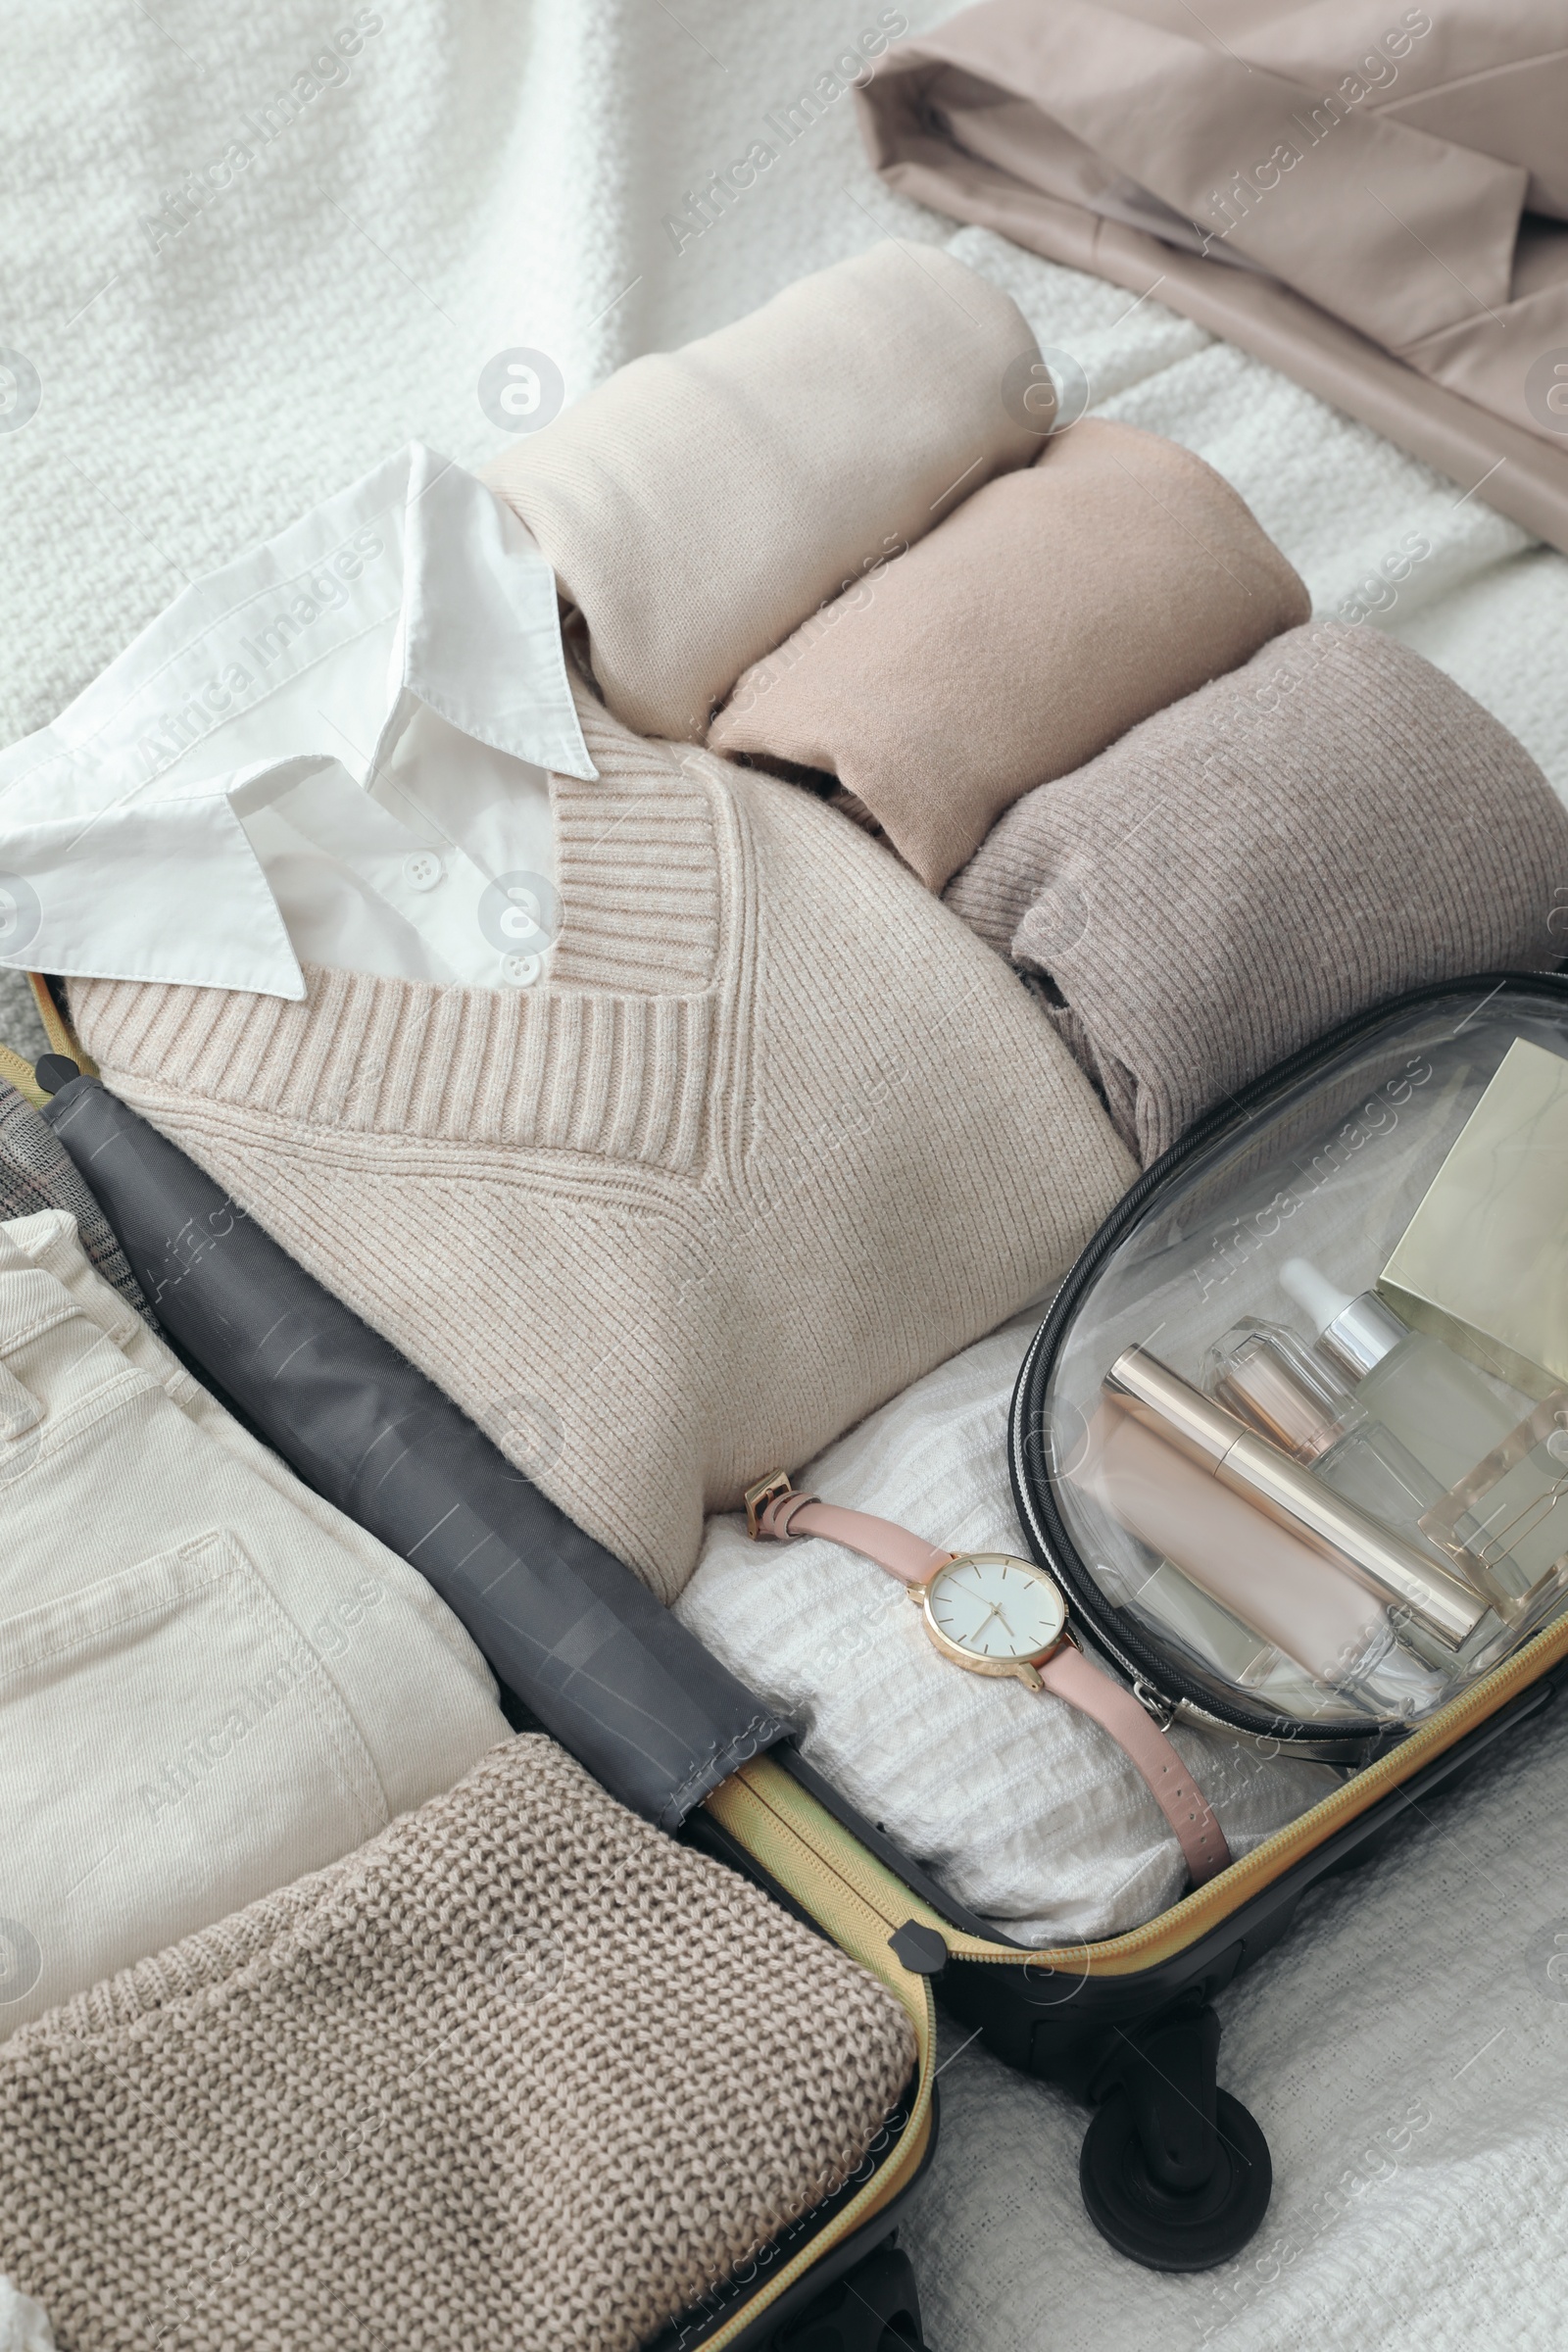 Photo of Open suitcase with folded clothes and accessories on bed